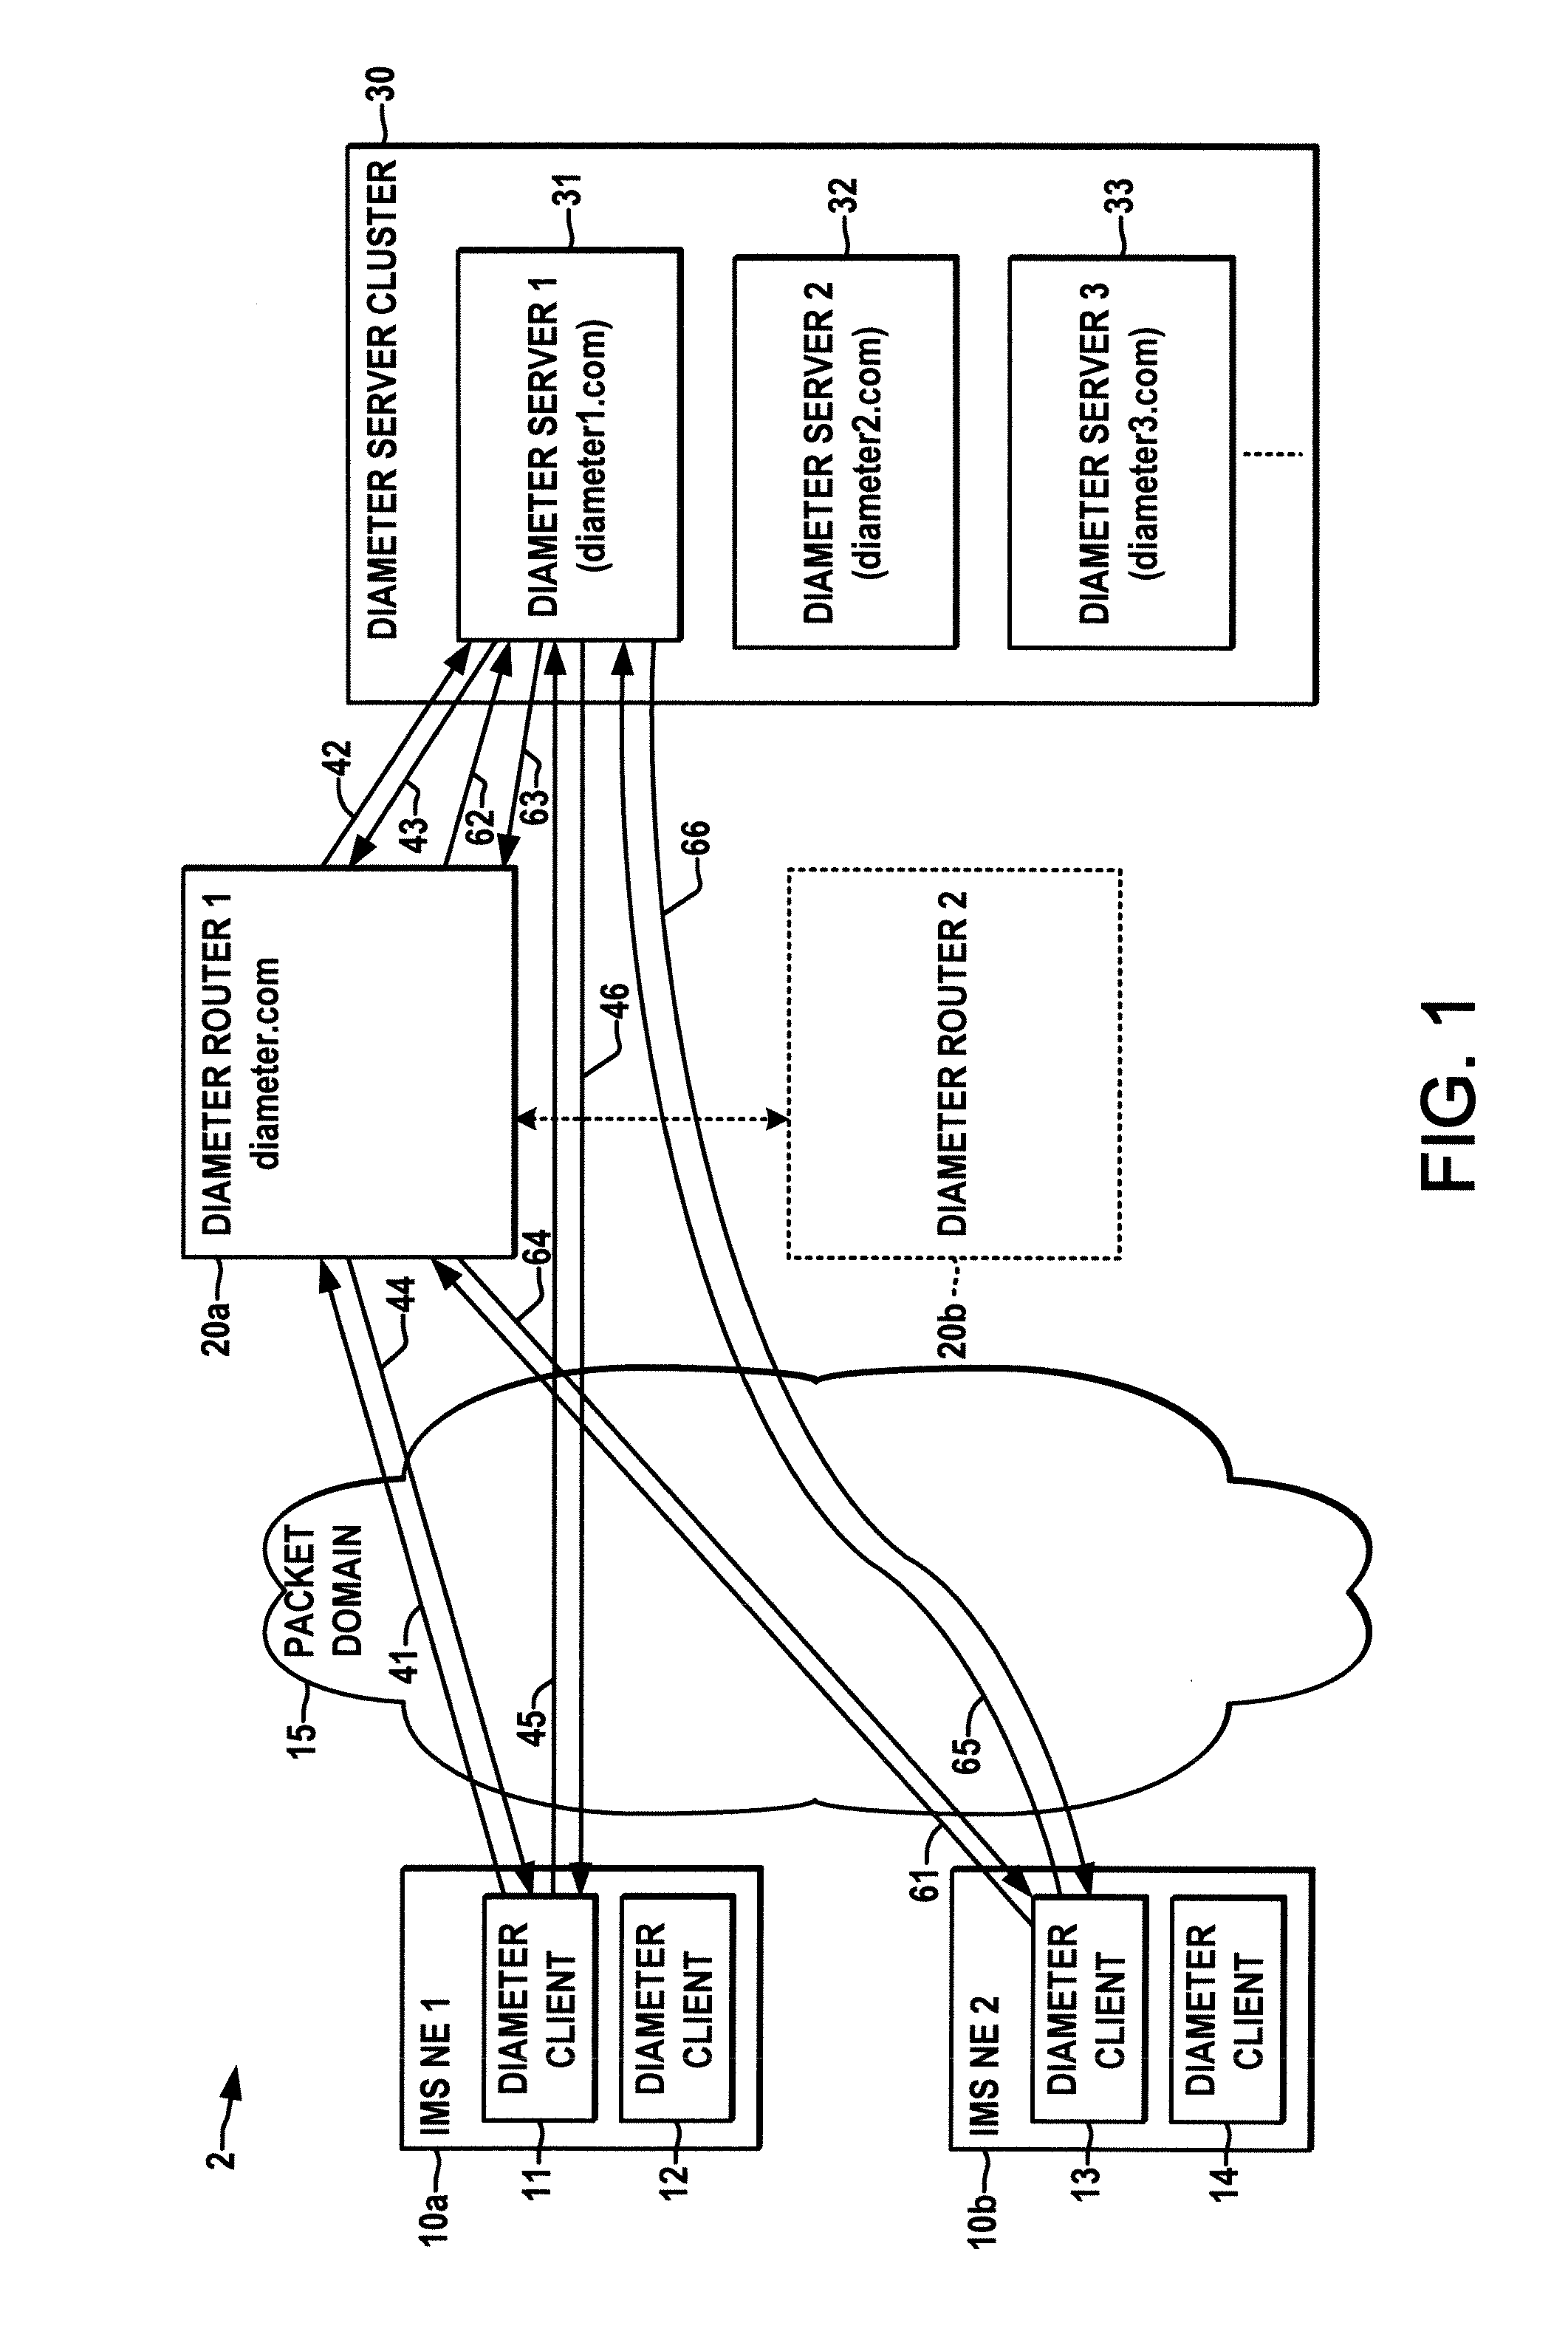 IMS diameter router with load balancing